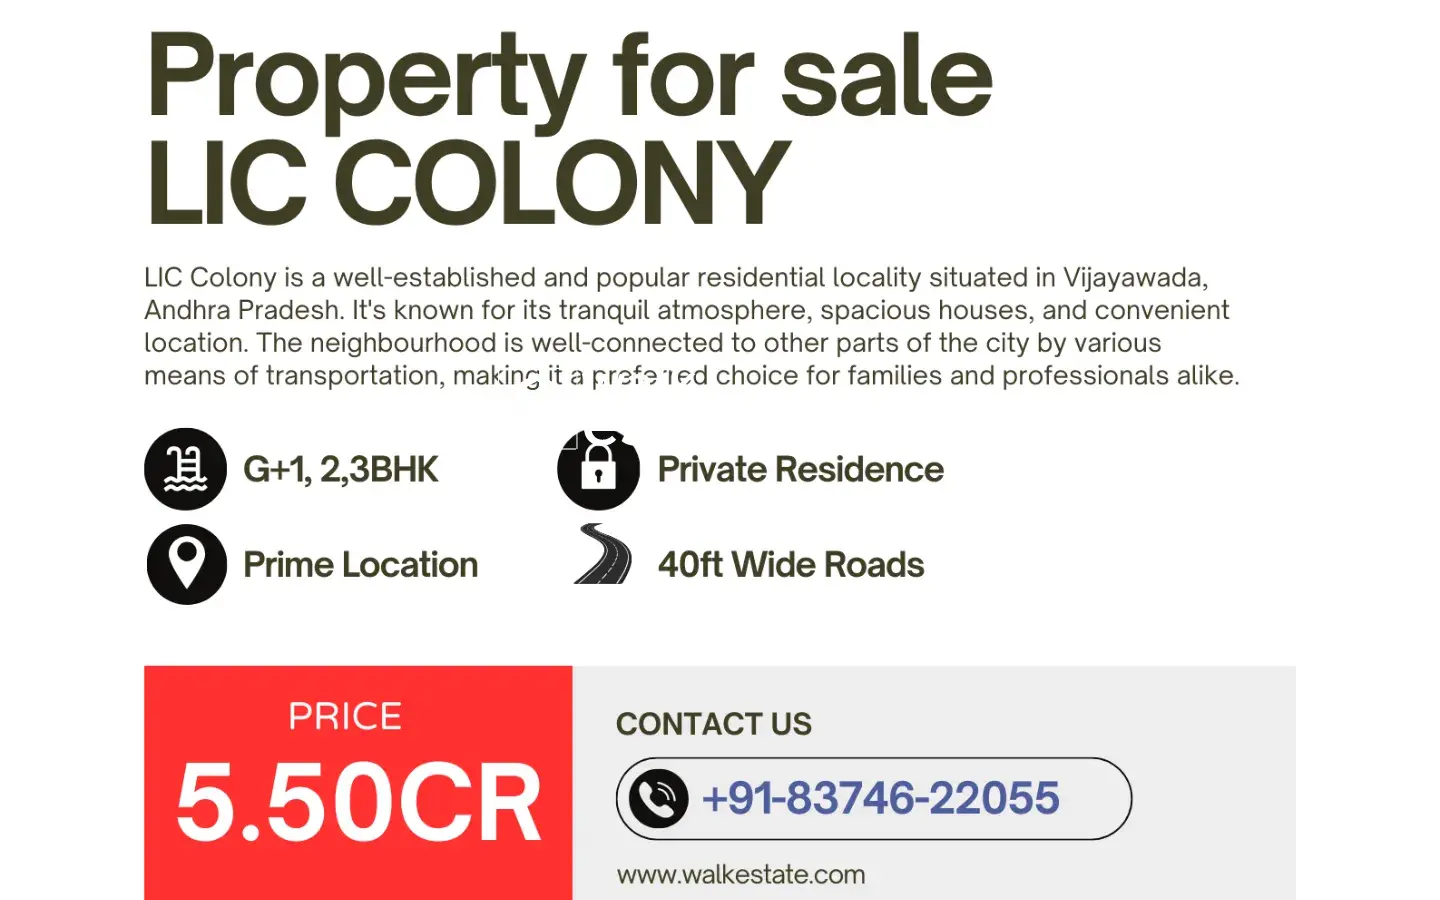 House for sale LIC Colony